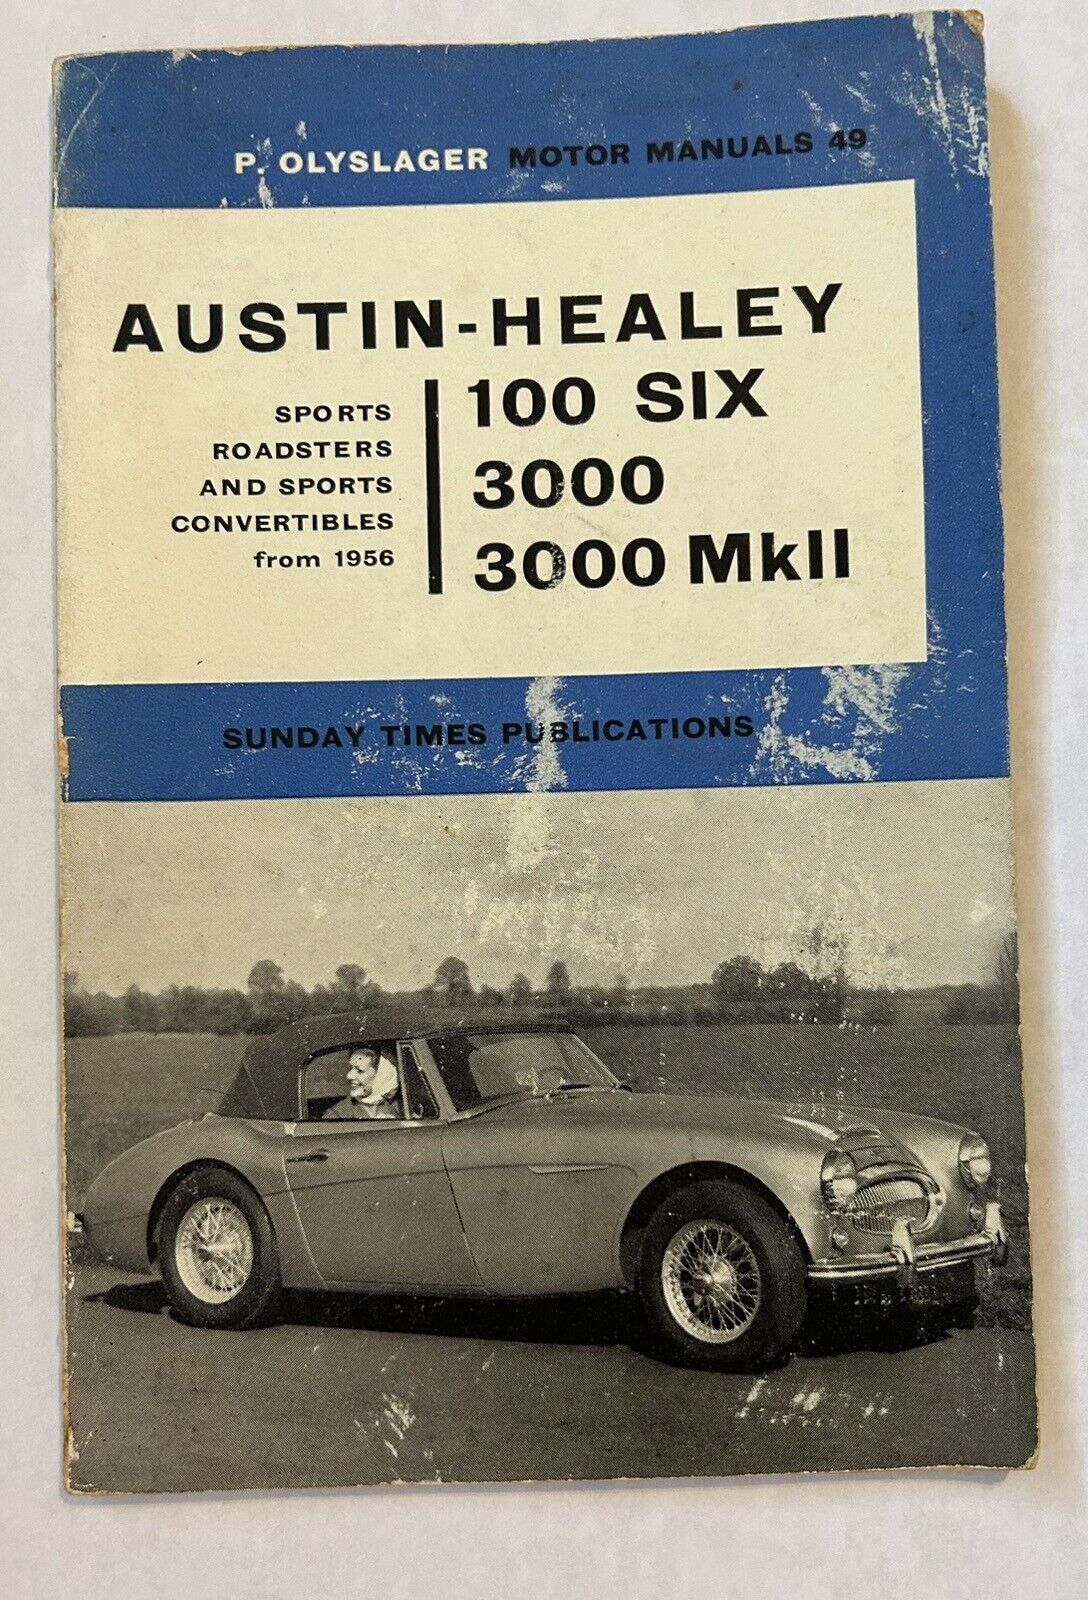 Austin-Healey 100 Six And 3000 P. Olyslager Motor Manuals 49 1963